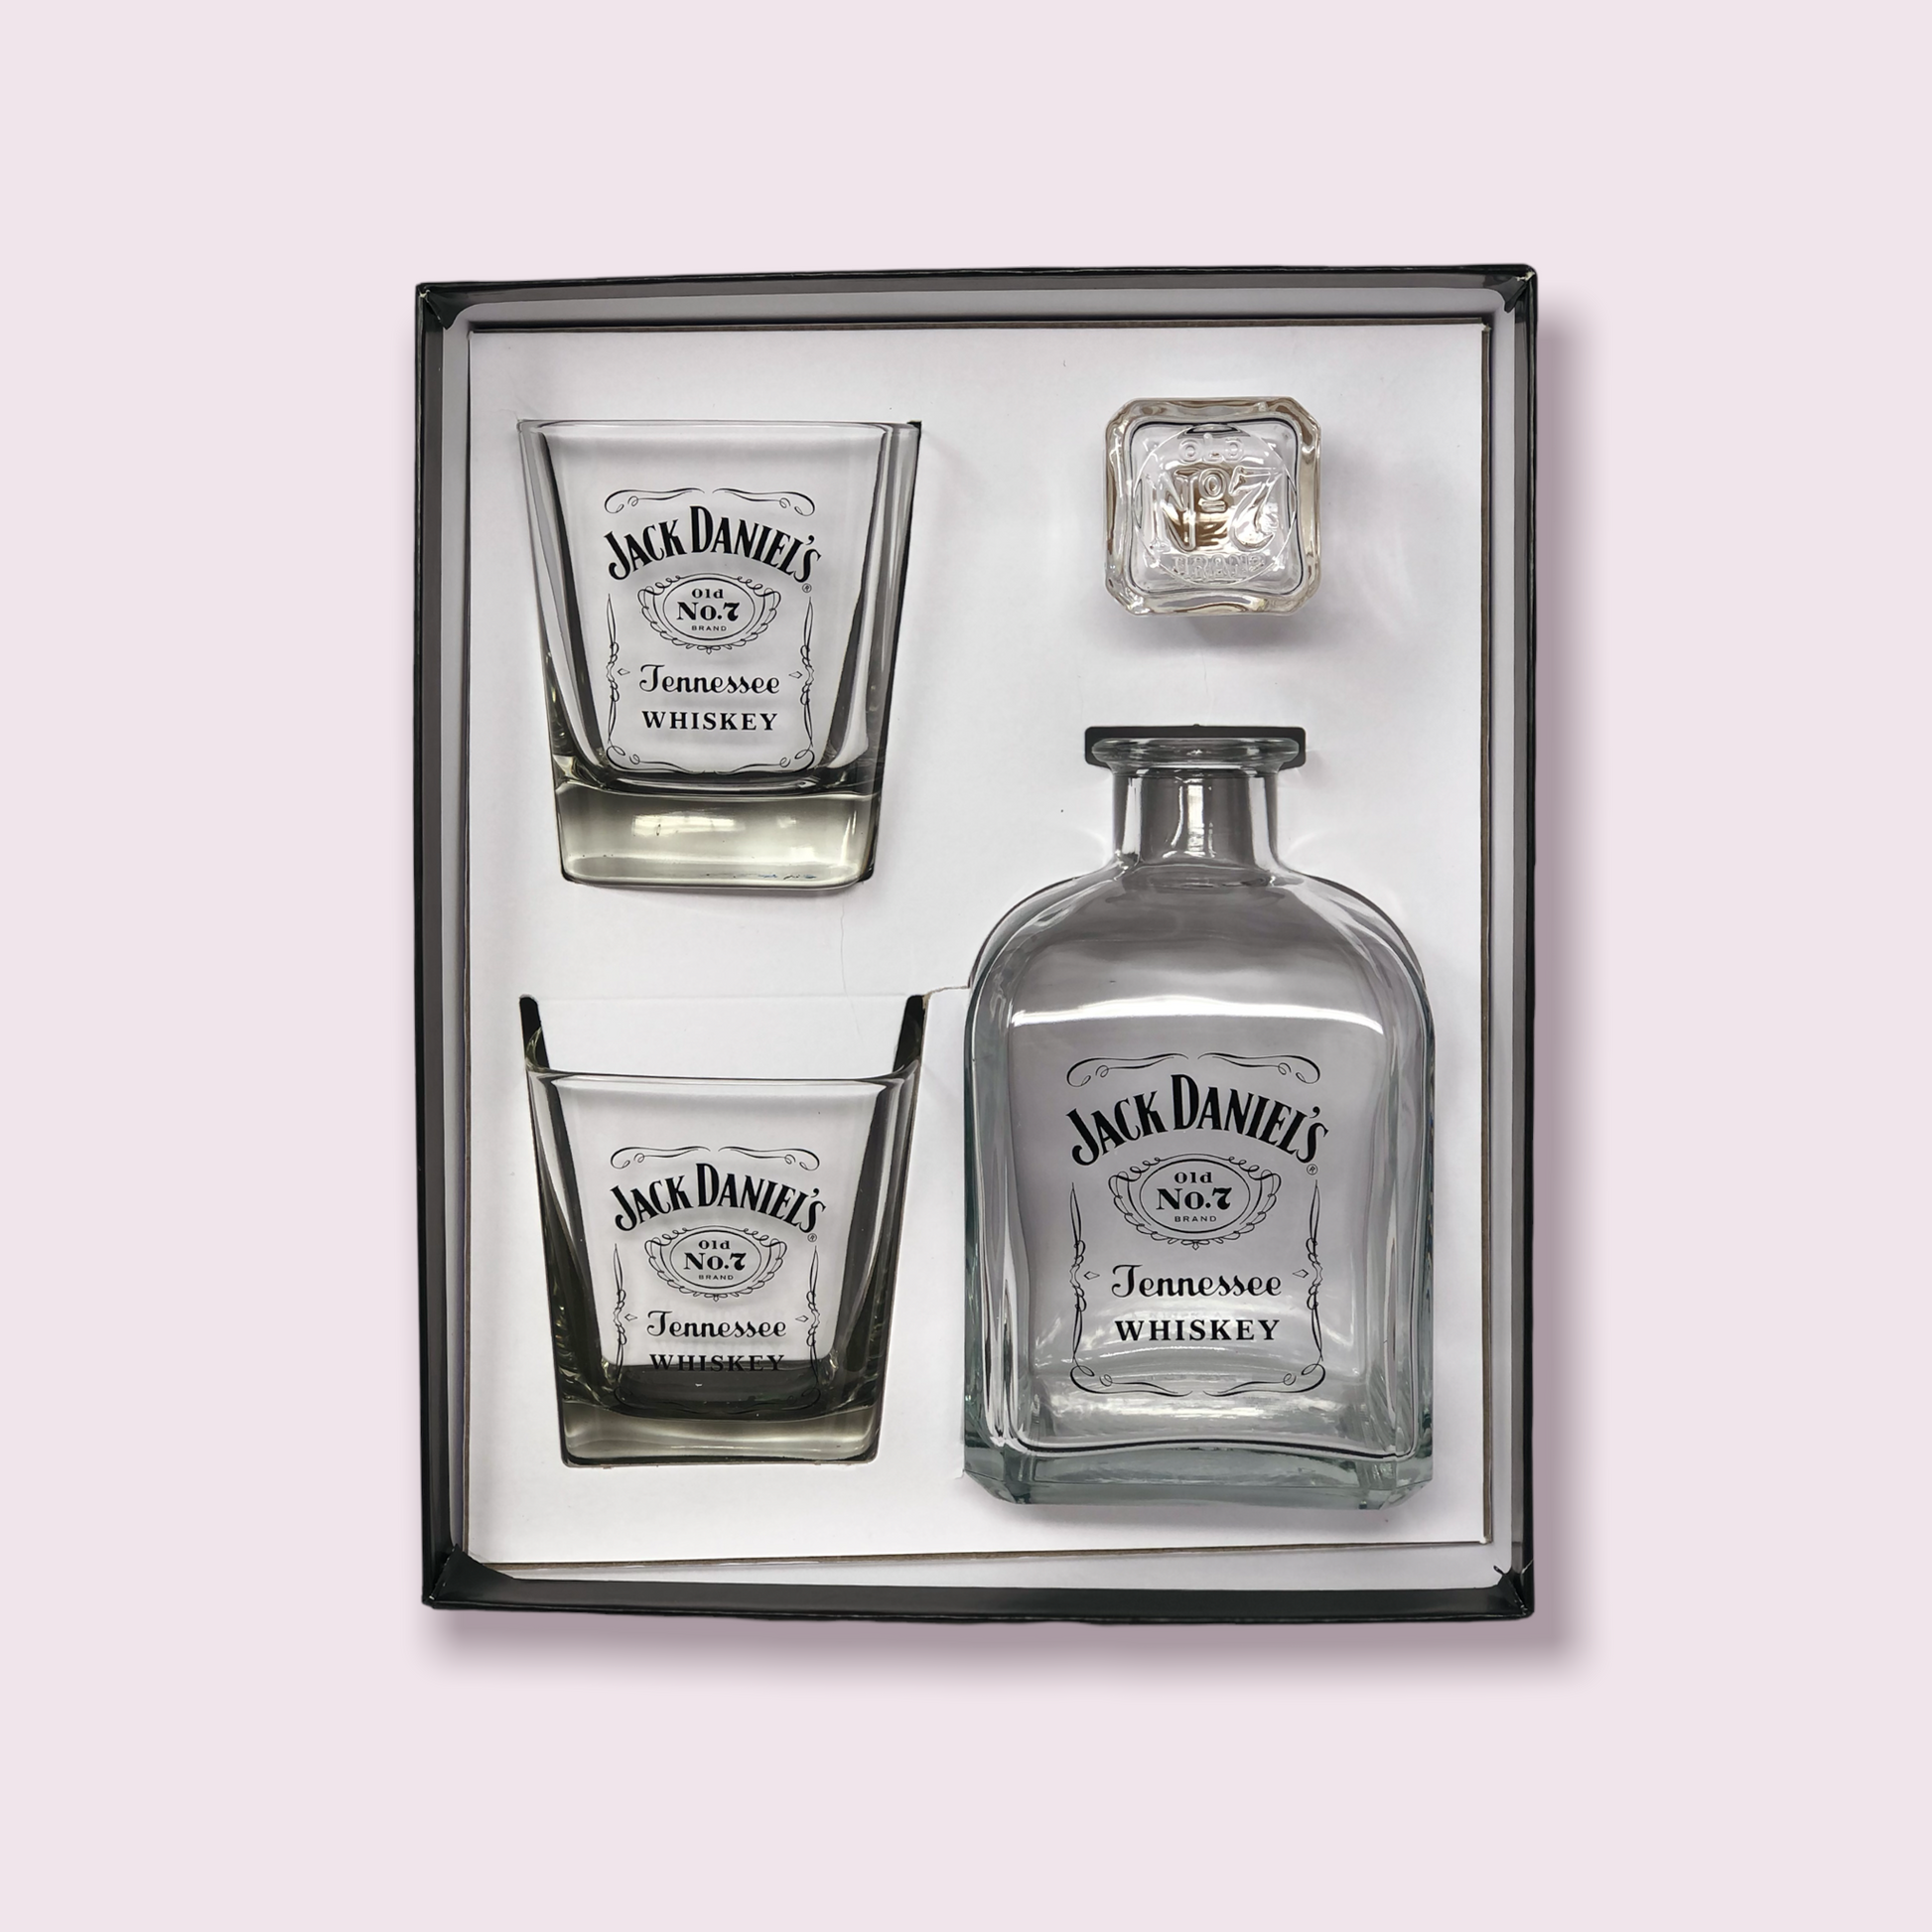 Jack Daniels Decanter & 2 DOF Glass Set with Gift Box - Black Label Logo - Officially Licensed